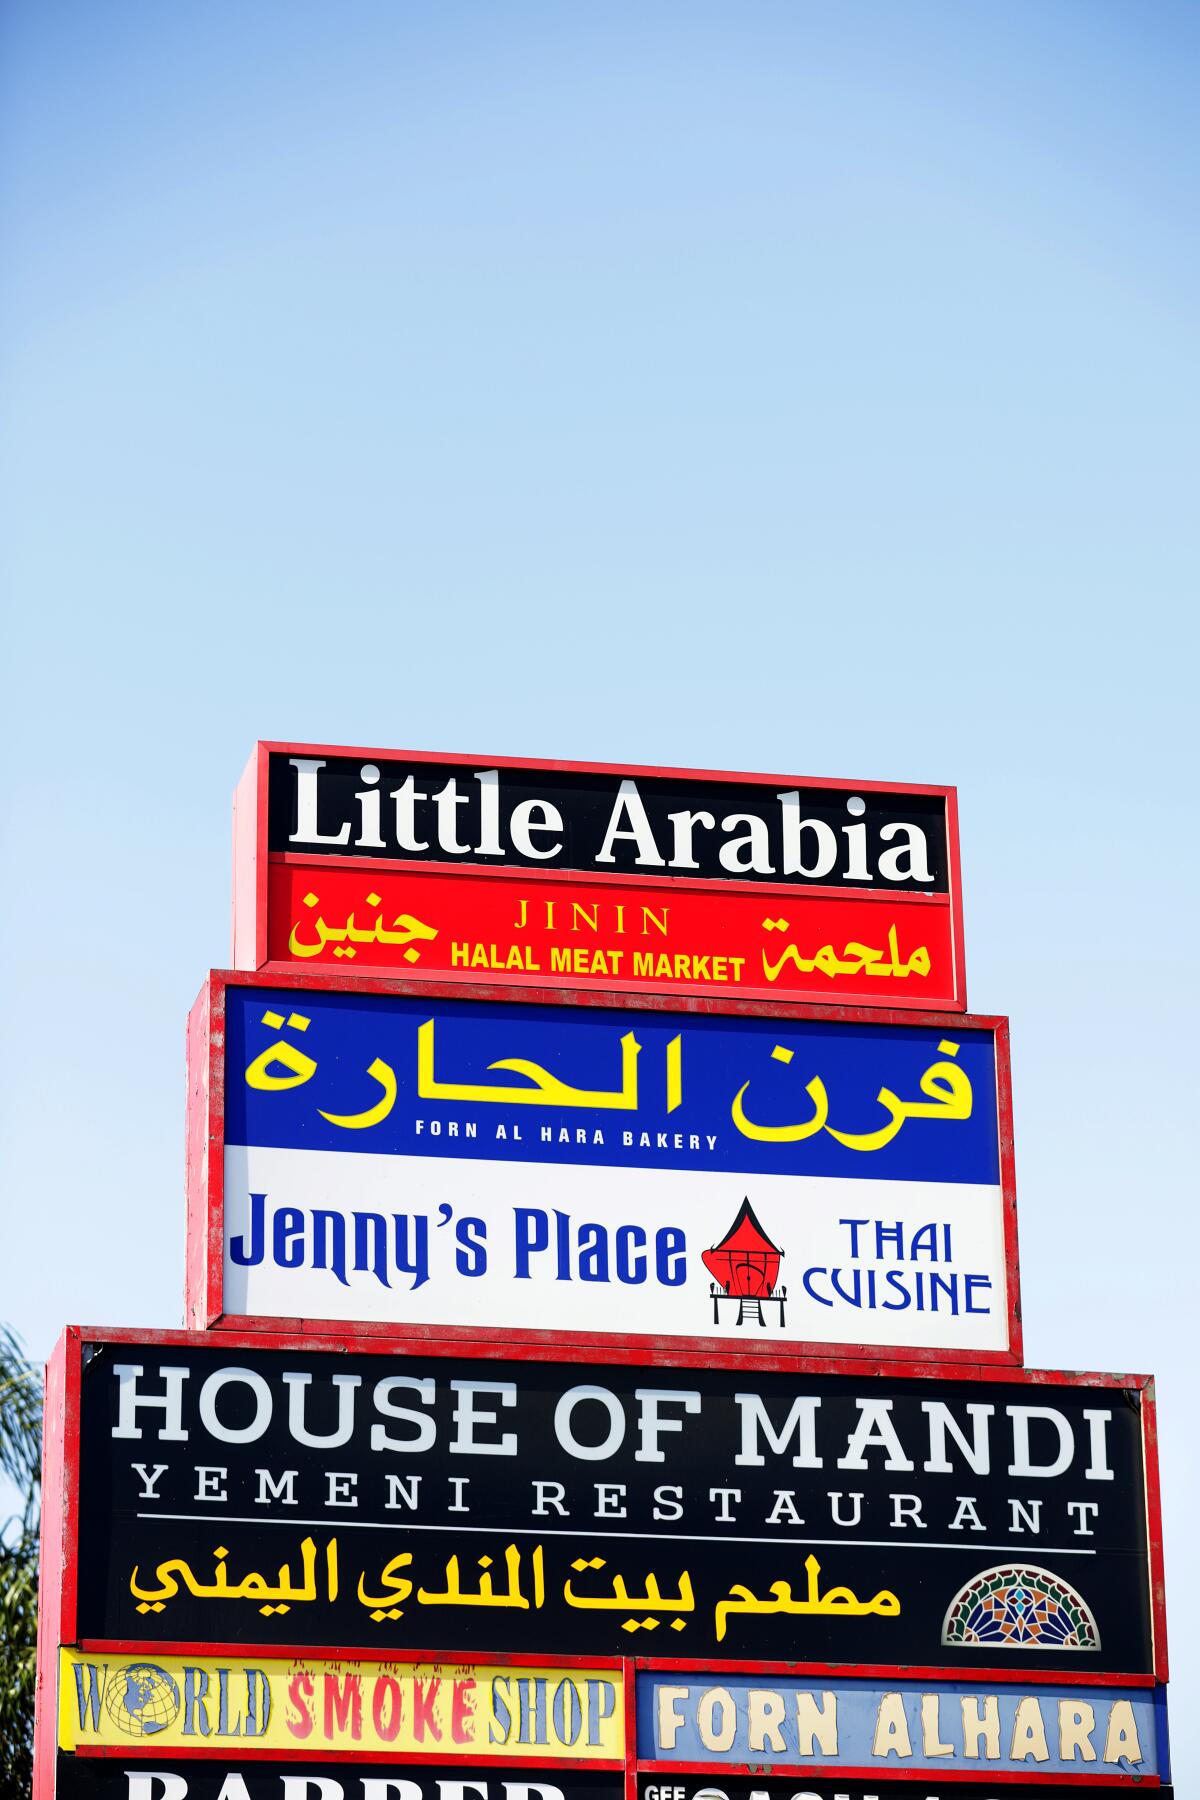 The city of Anaheim has officially designated about a mile strip on Brookhurst Street as Little Arabia.